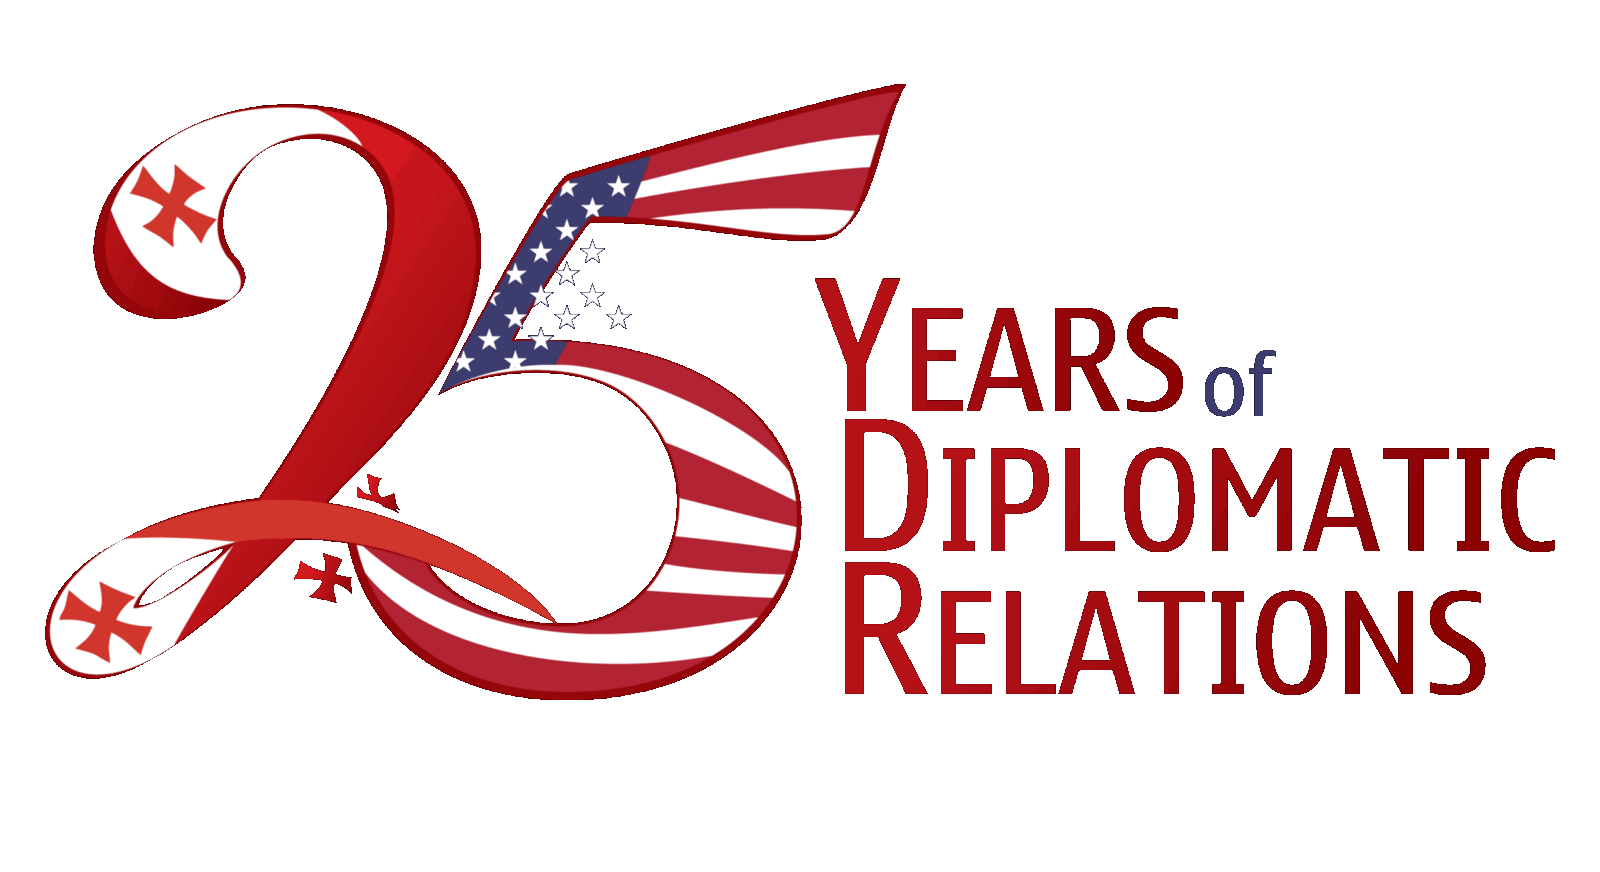 Culture clipart foreign policy. Embassy celebrates year anniversary